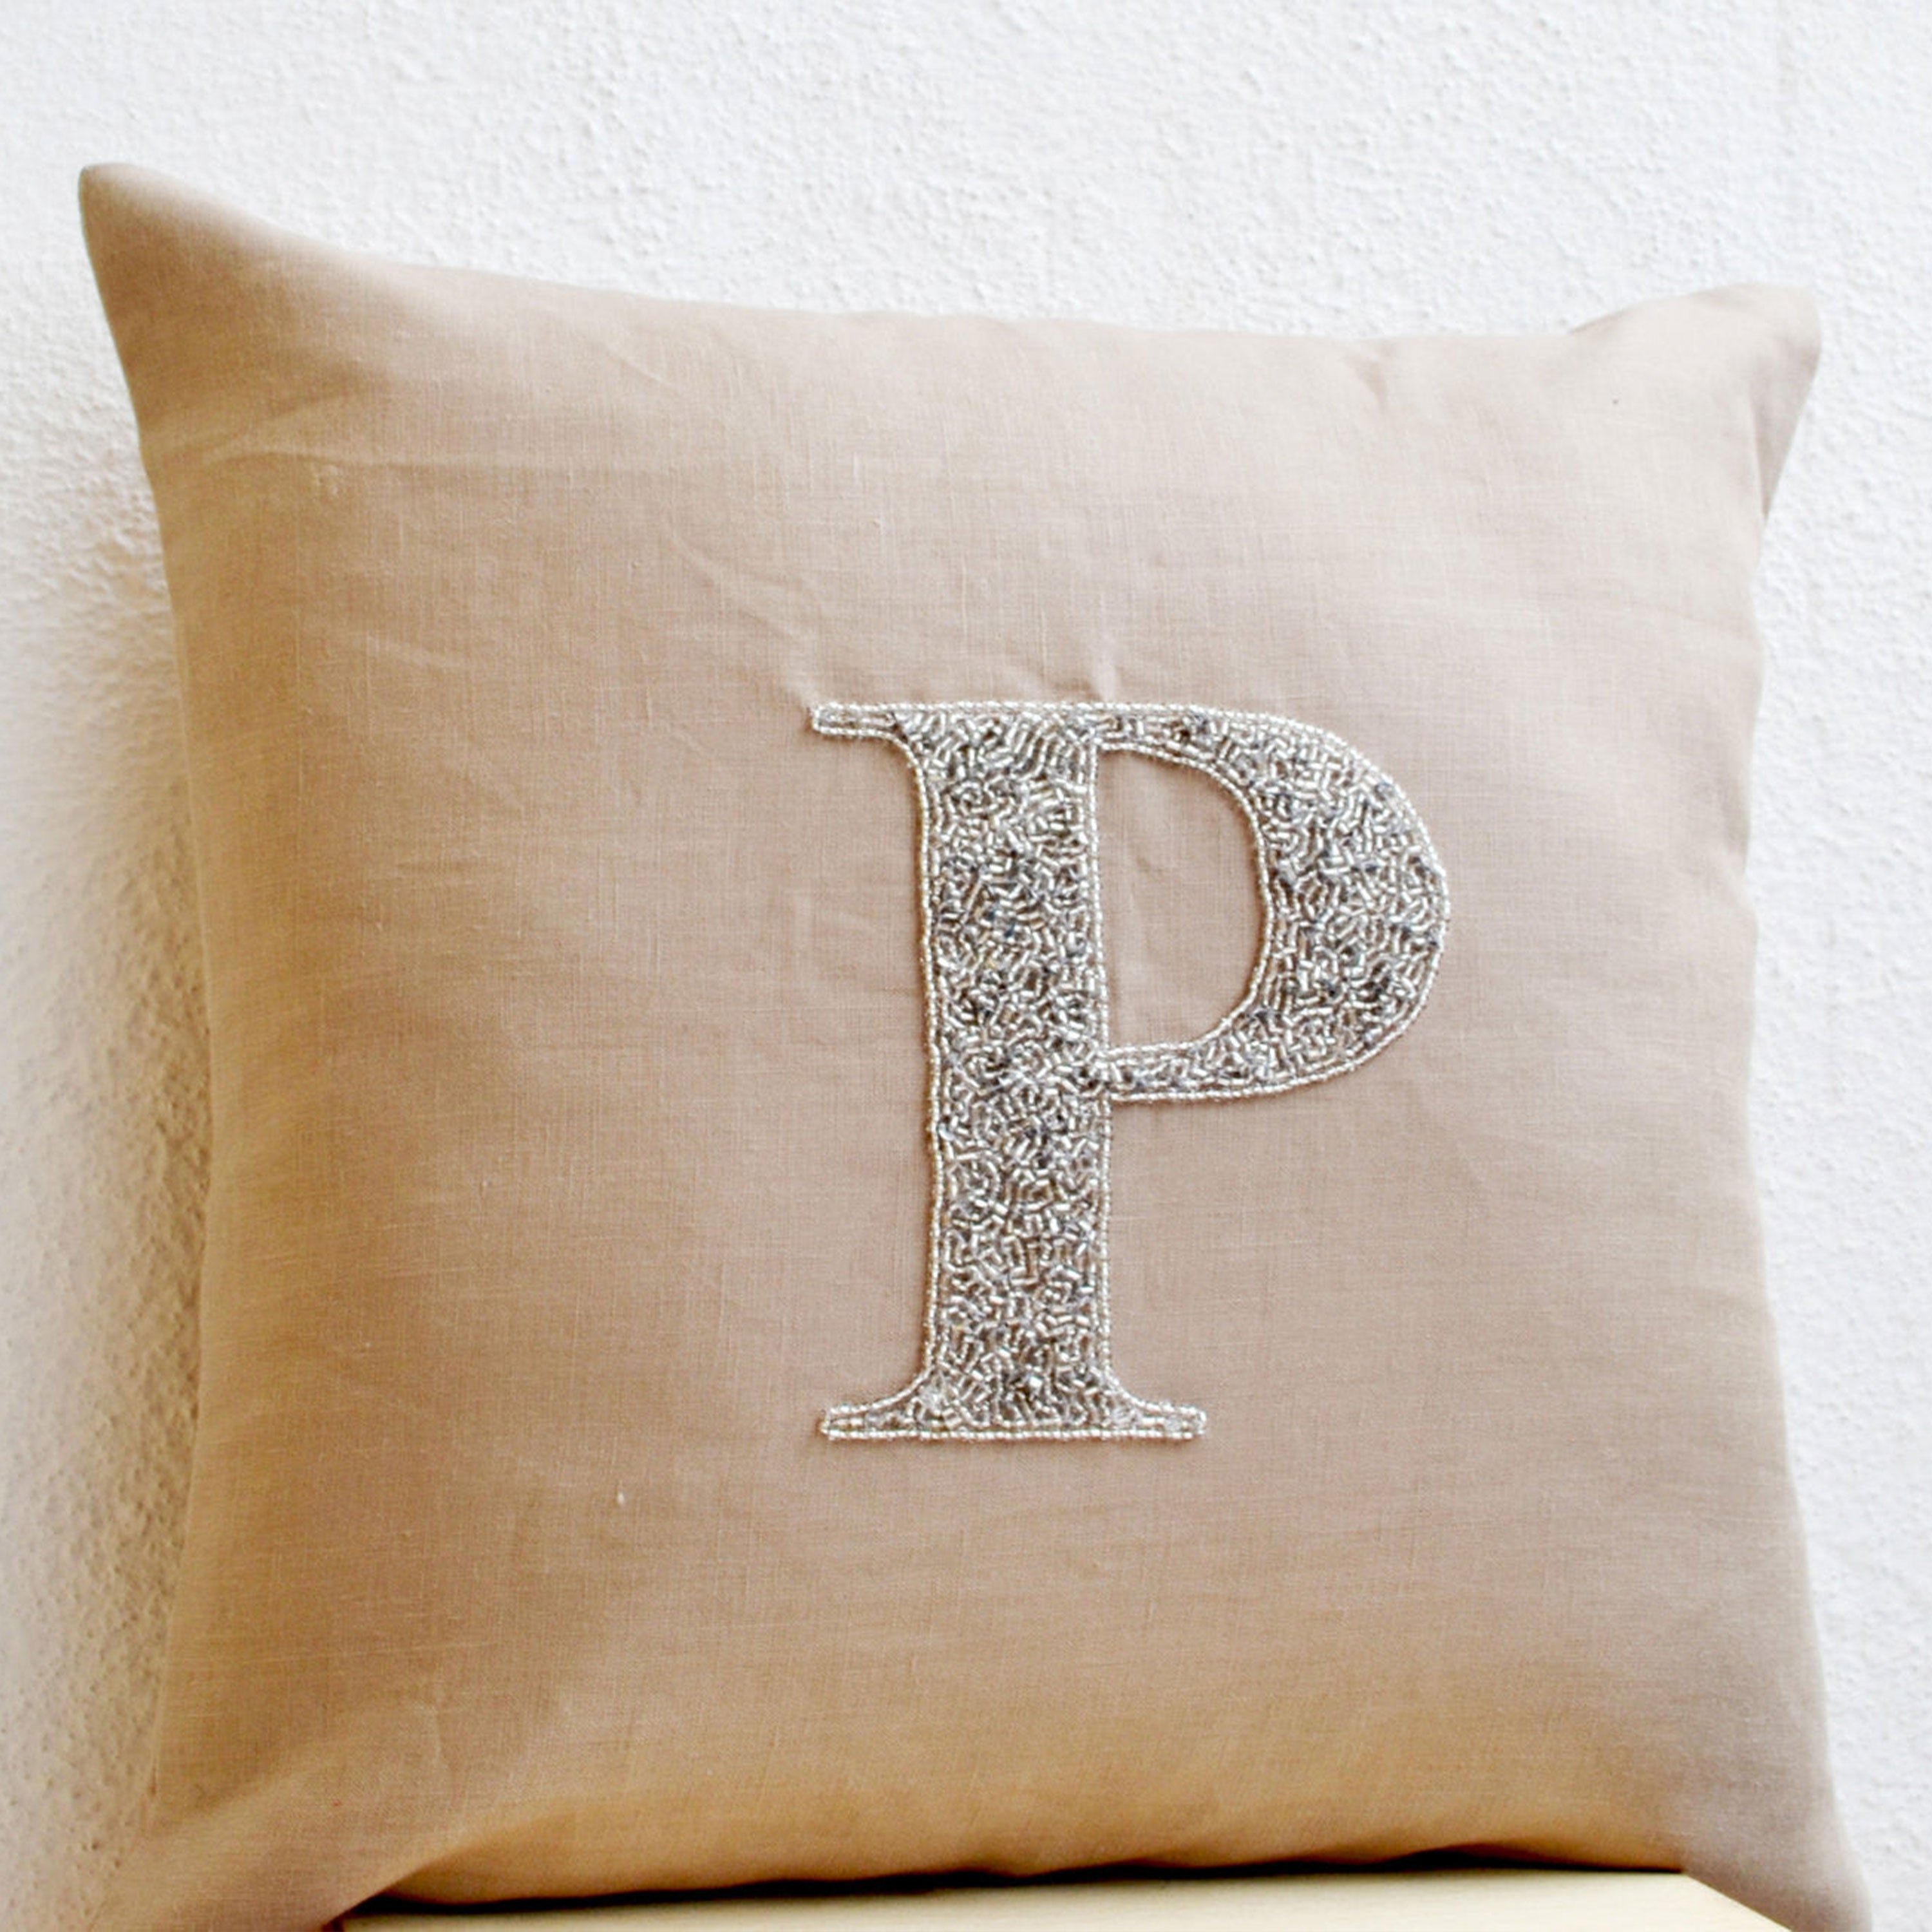 Customized Silver Sequin Monogram Pillow Cover On Beige Gray Linen